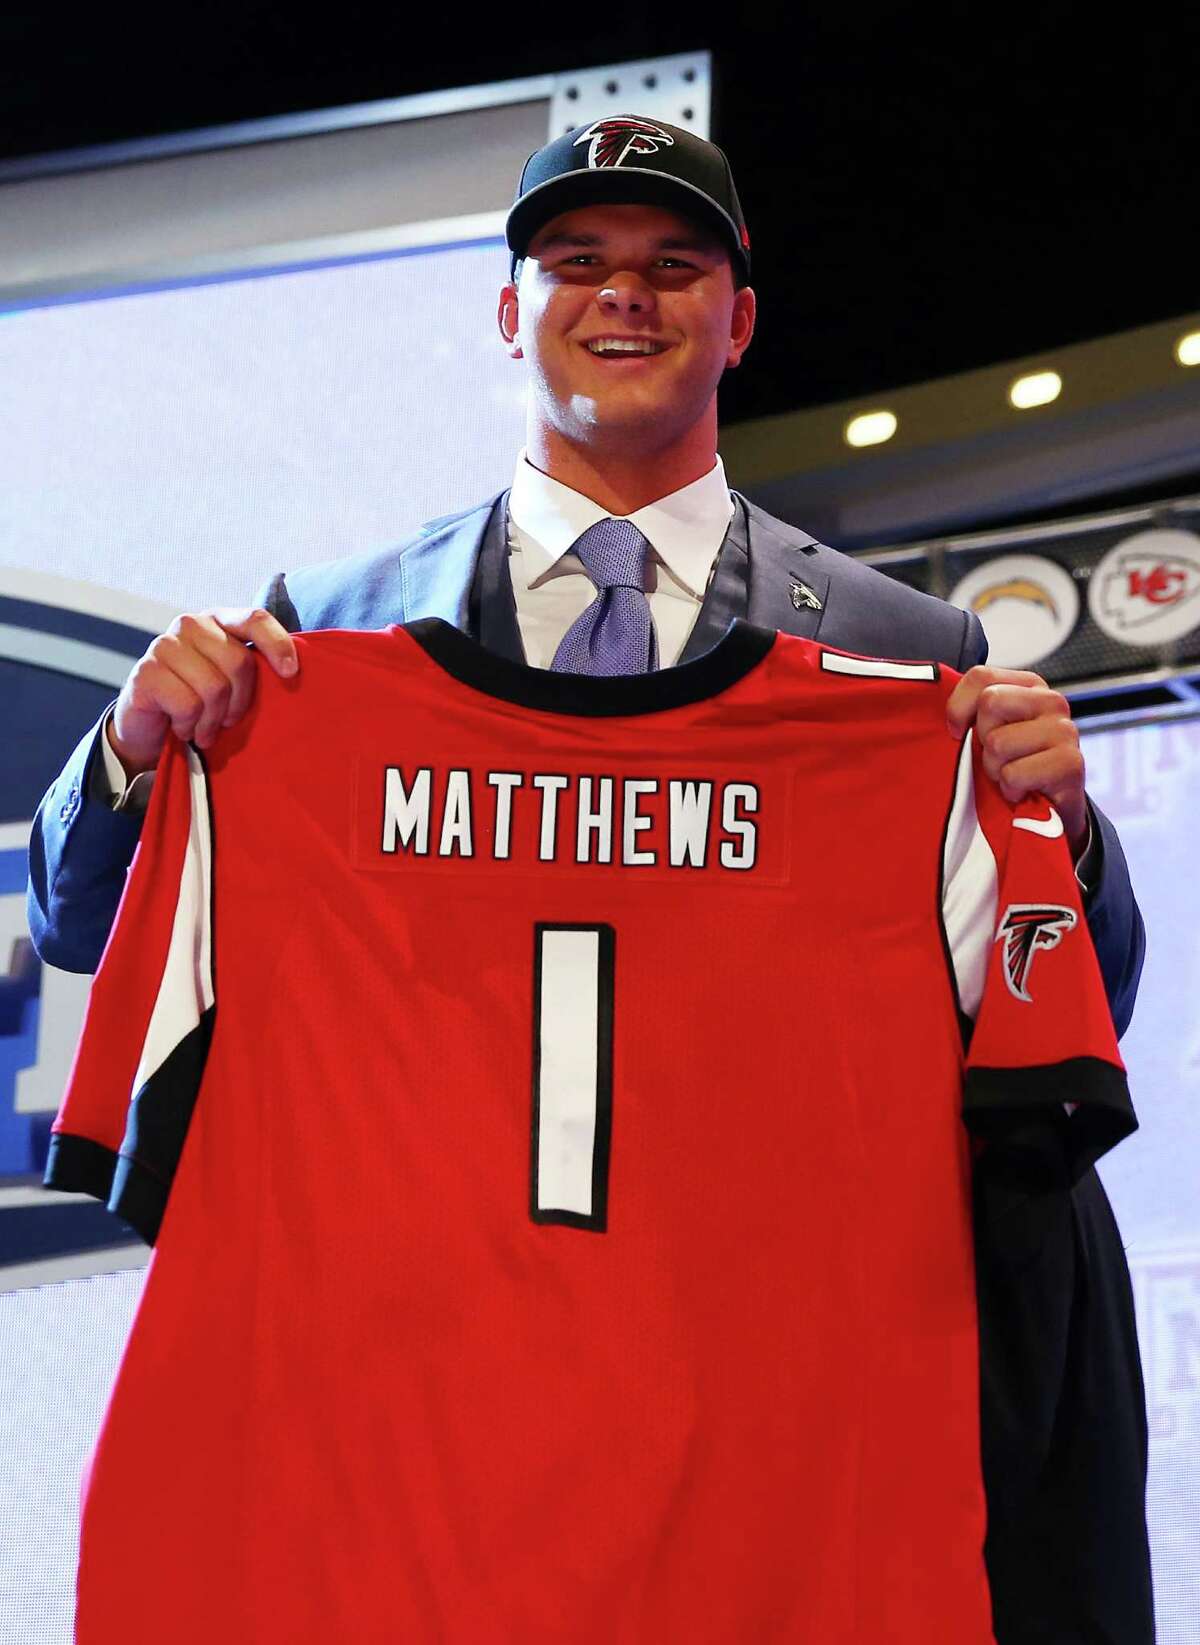 NEW YORK, NY - MAY 08: Jake Matthews of the Texas A&M Aggies poses with a jersey after he was picked #6 overall by the Atlanta Falcons during the first round of the 2014 NFL Draft at Radio City Music Hall on May 8, 2014 in New York City.